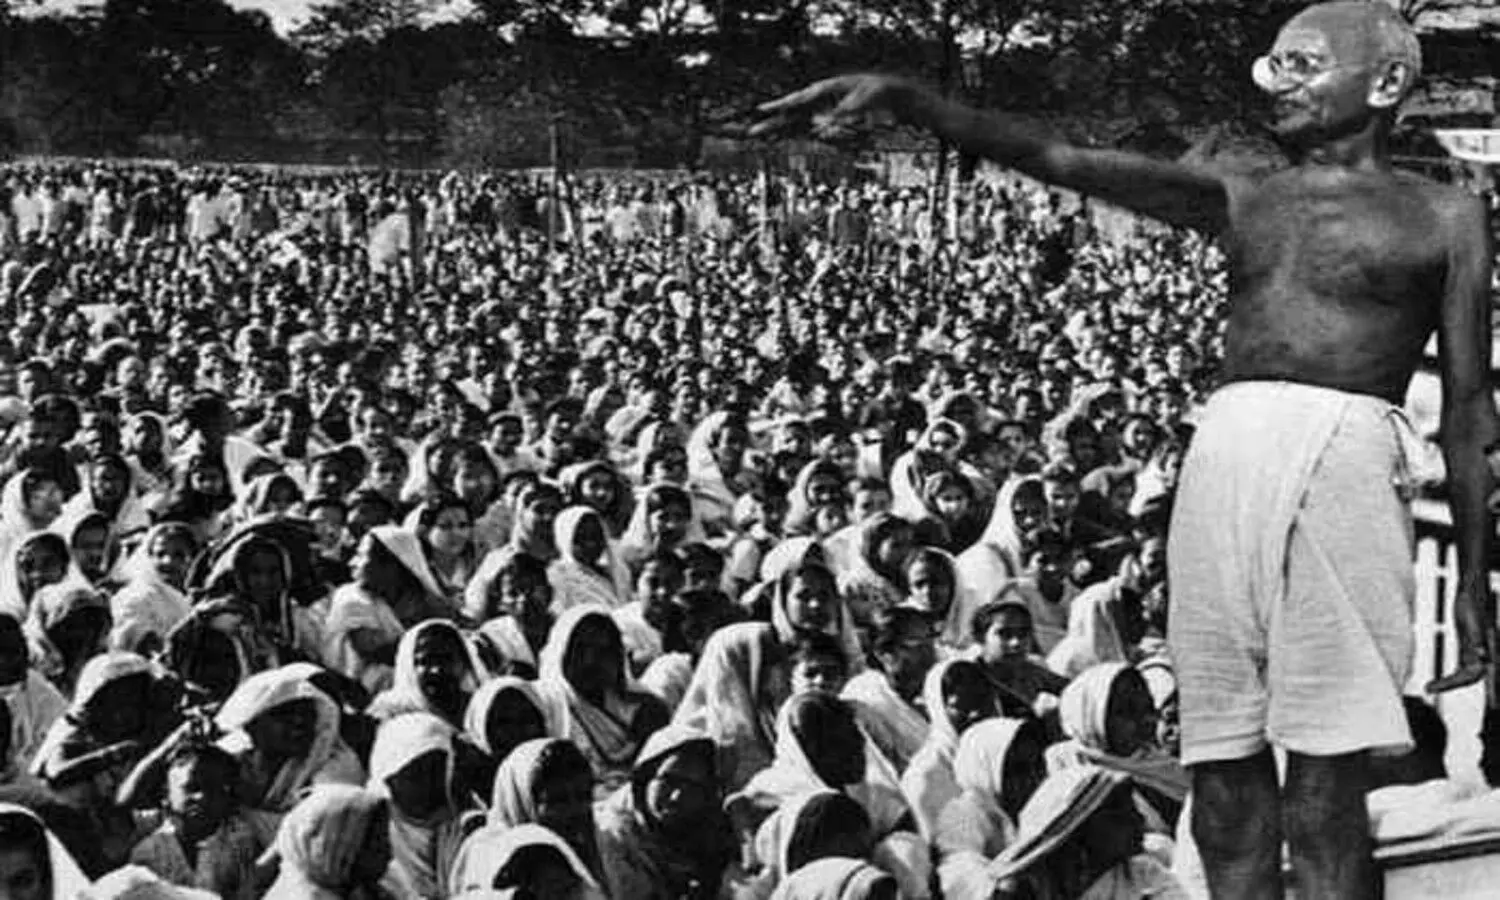 Quit India Movement was started on 08 August